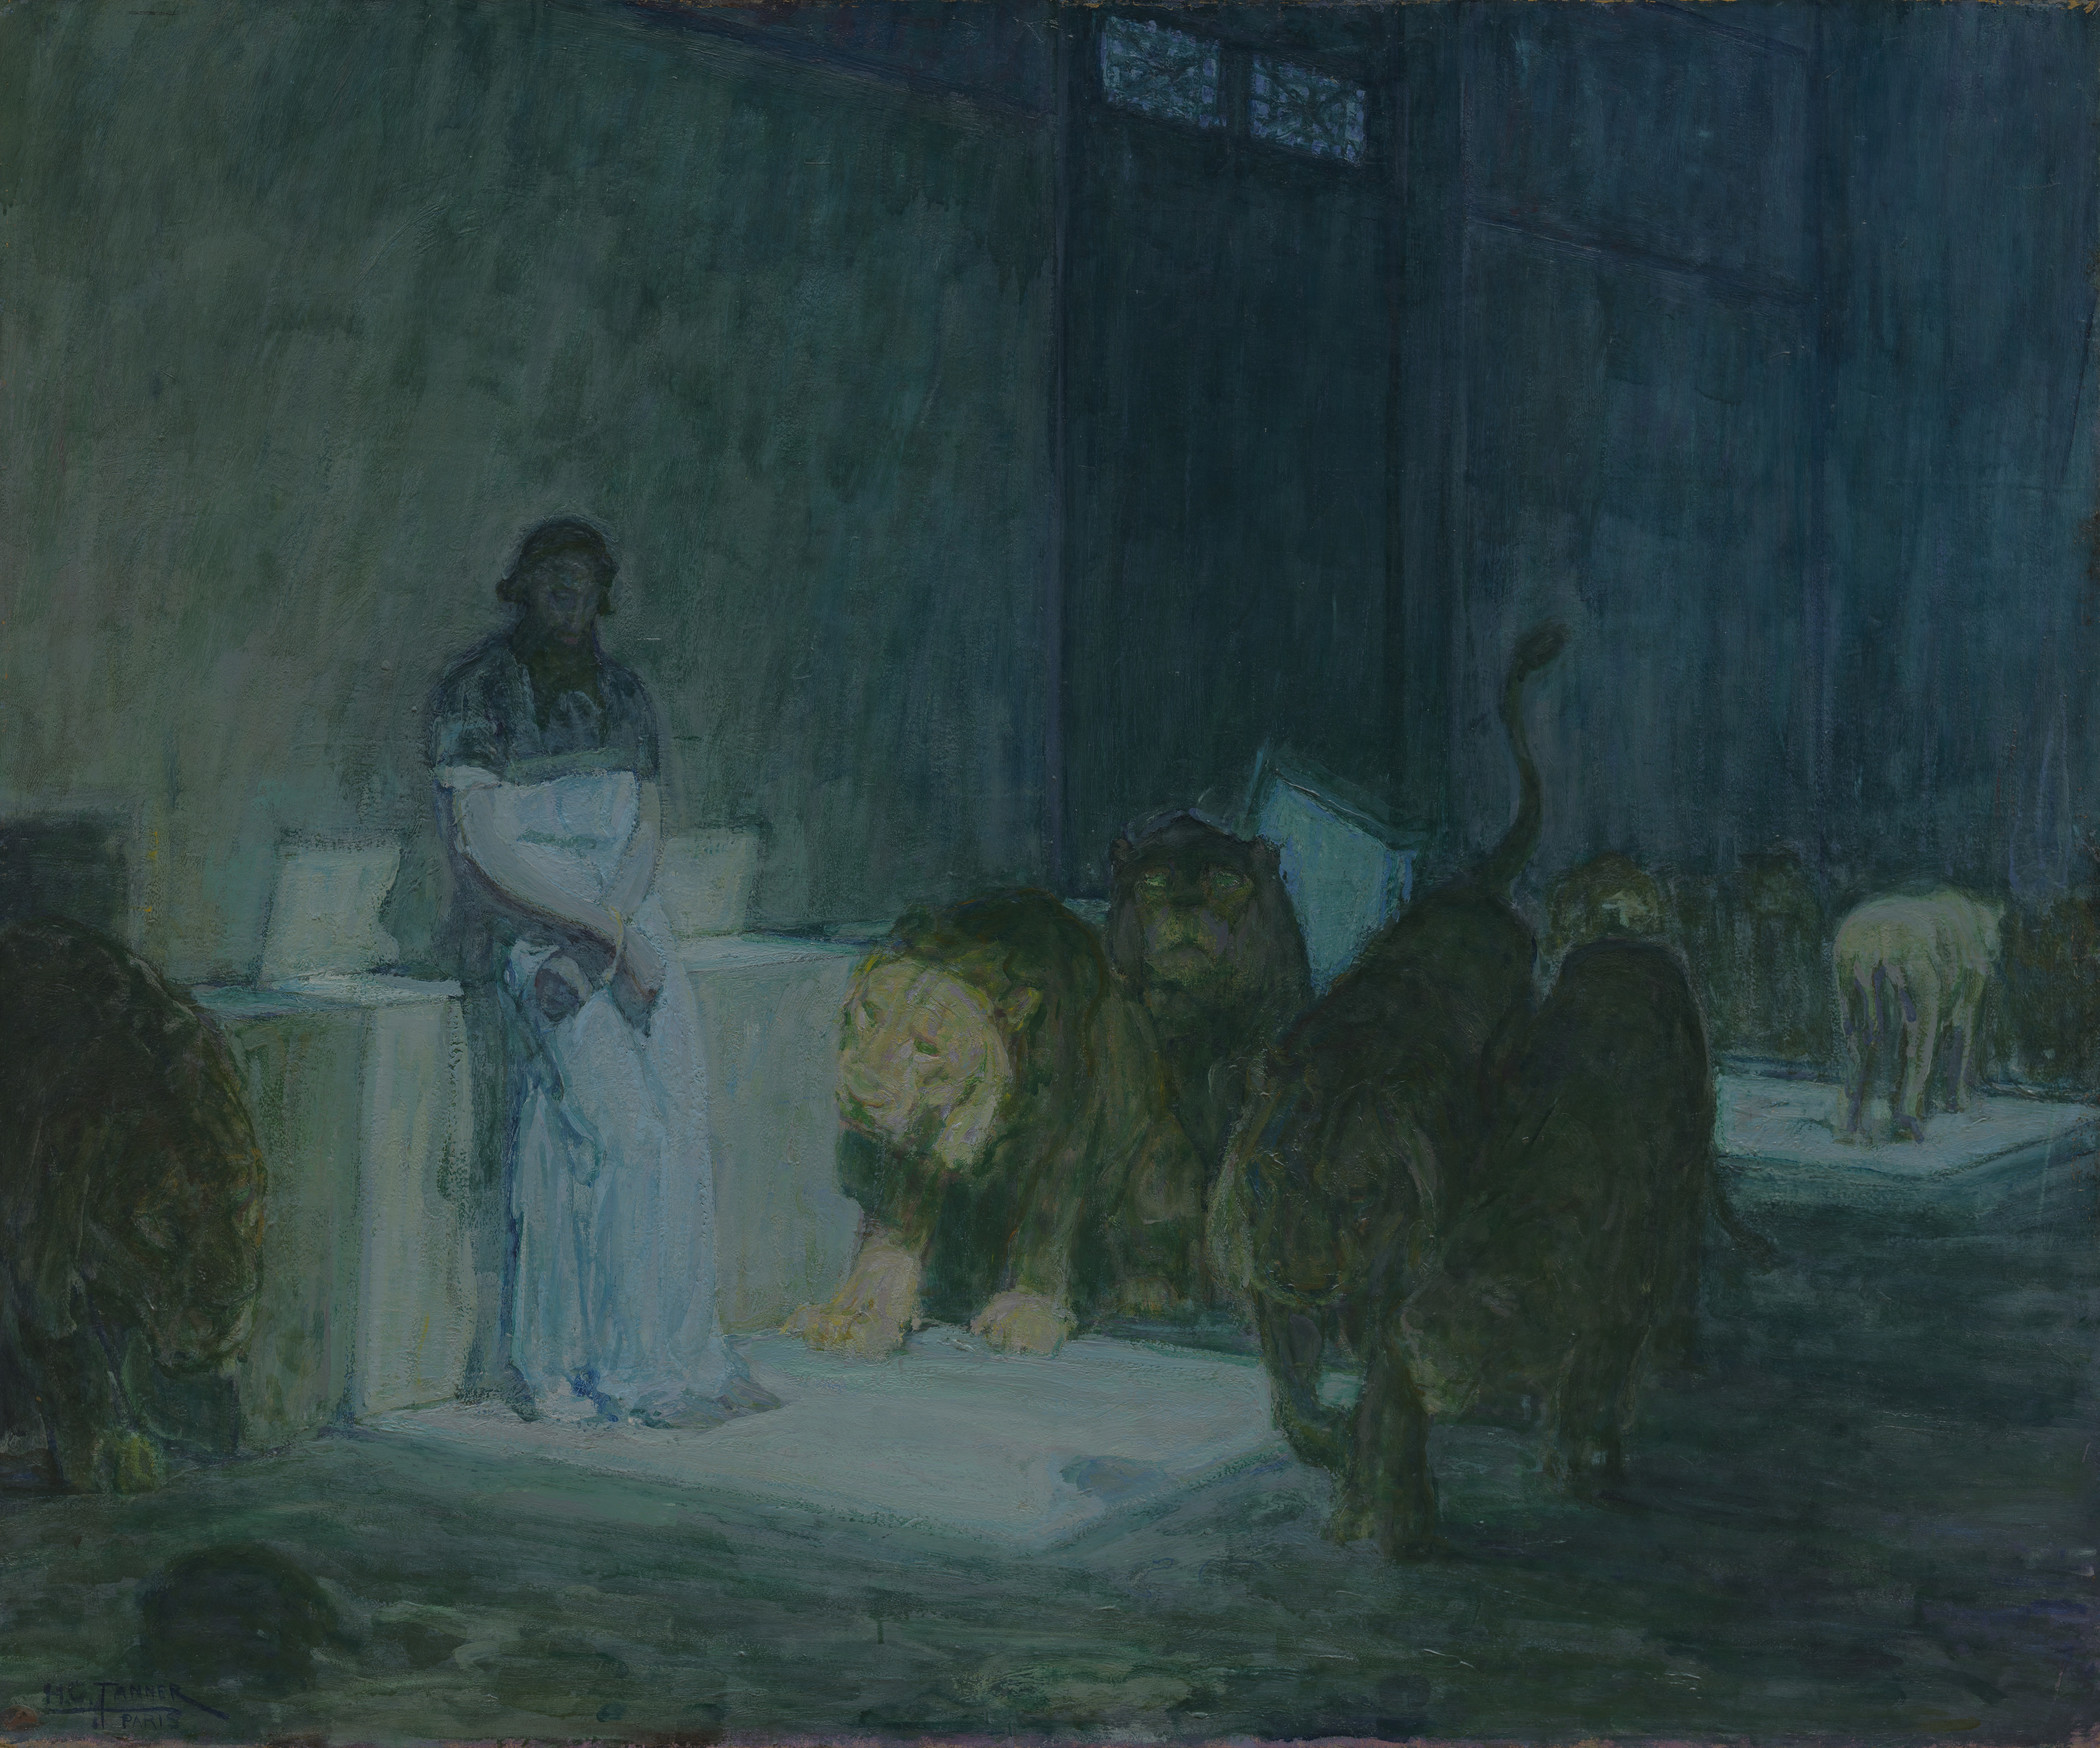 Henry Ossawa Tanner, Daniel in the Lions' Den, 1907–18, Los Angeles County Museum of Art, Mr. and Mrs. William Preston Harrison Collection, photo © Museum Associates/LACMA